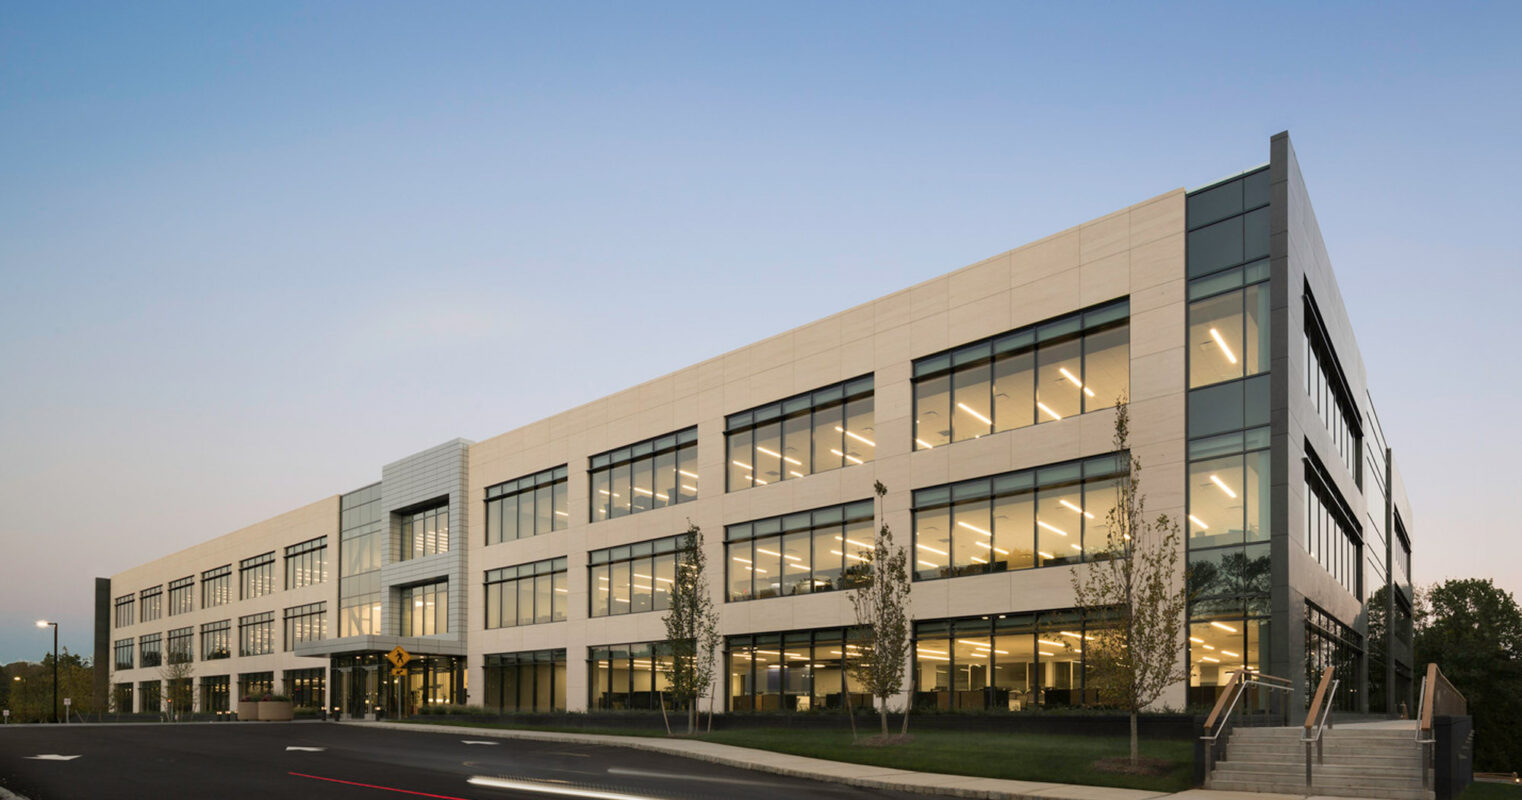 Modern office building exterior at dusk, featuring clean lines, expansive glass windows, and a mix of white paneling. The design emphasizes transparency and open spaces, highlighted by the evening's soft ambient light.